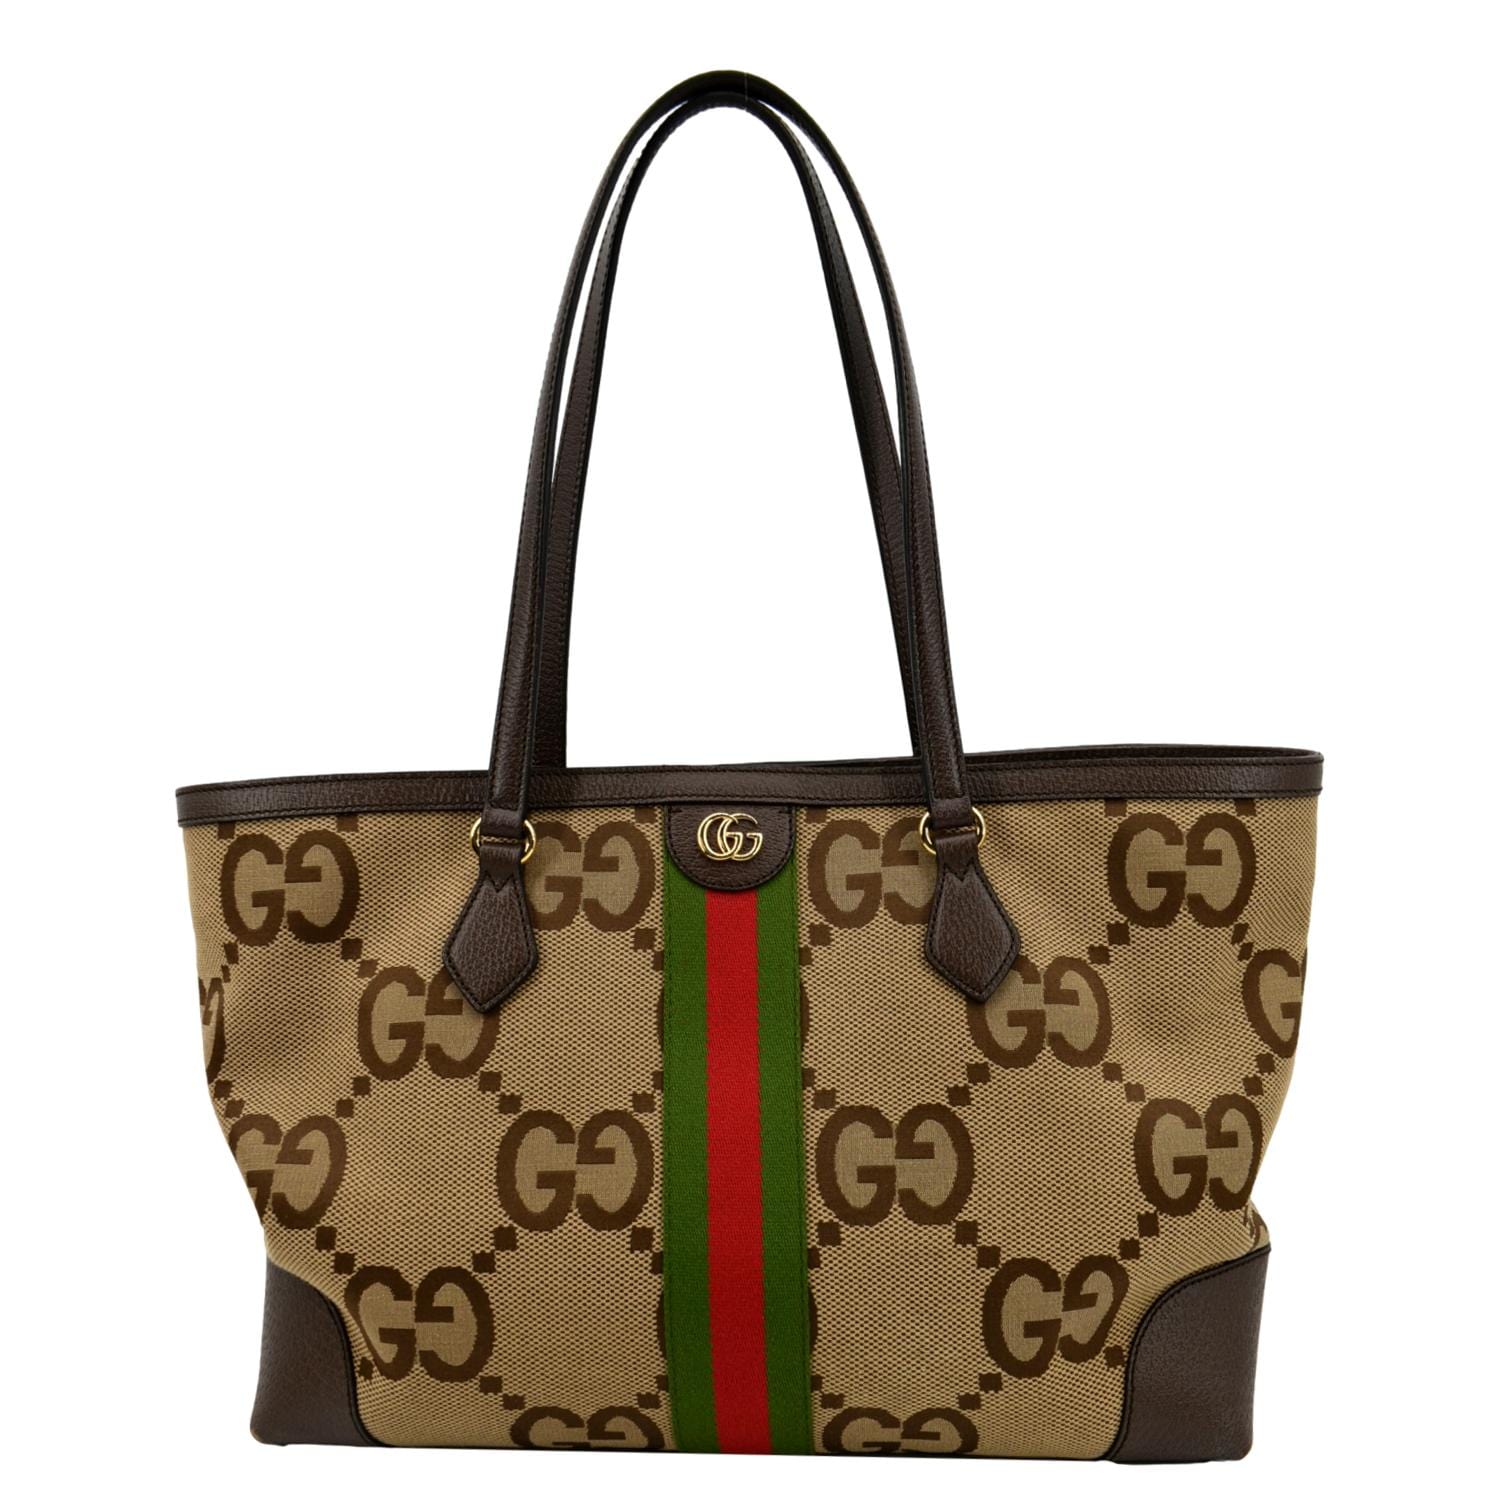 Gucci Ophidia Jumbo GG Small Canvas Shoulder Bag